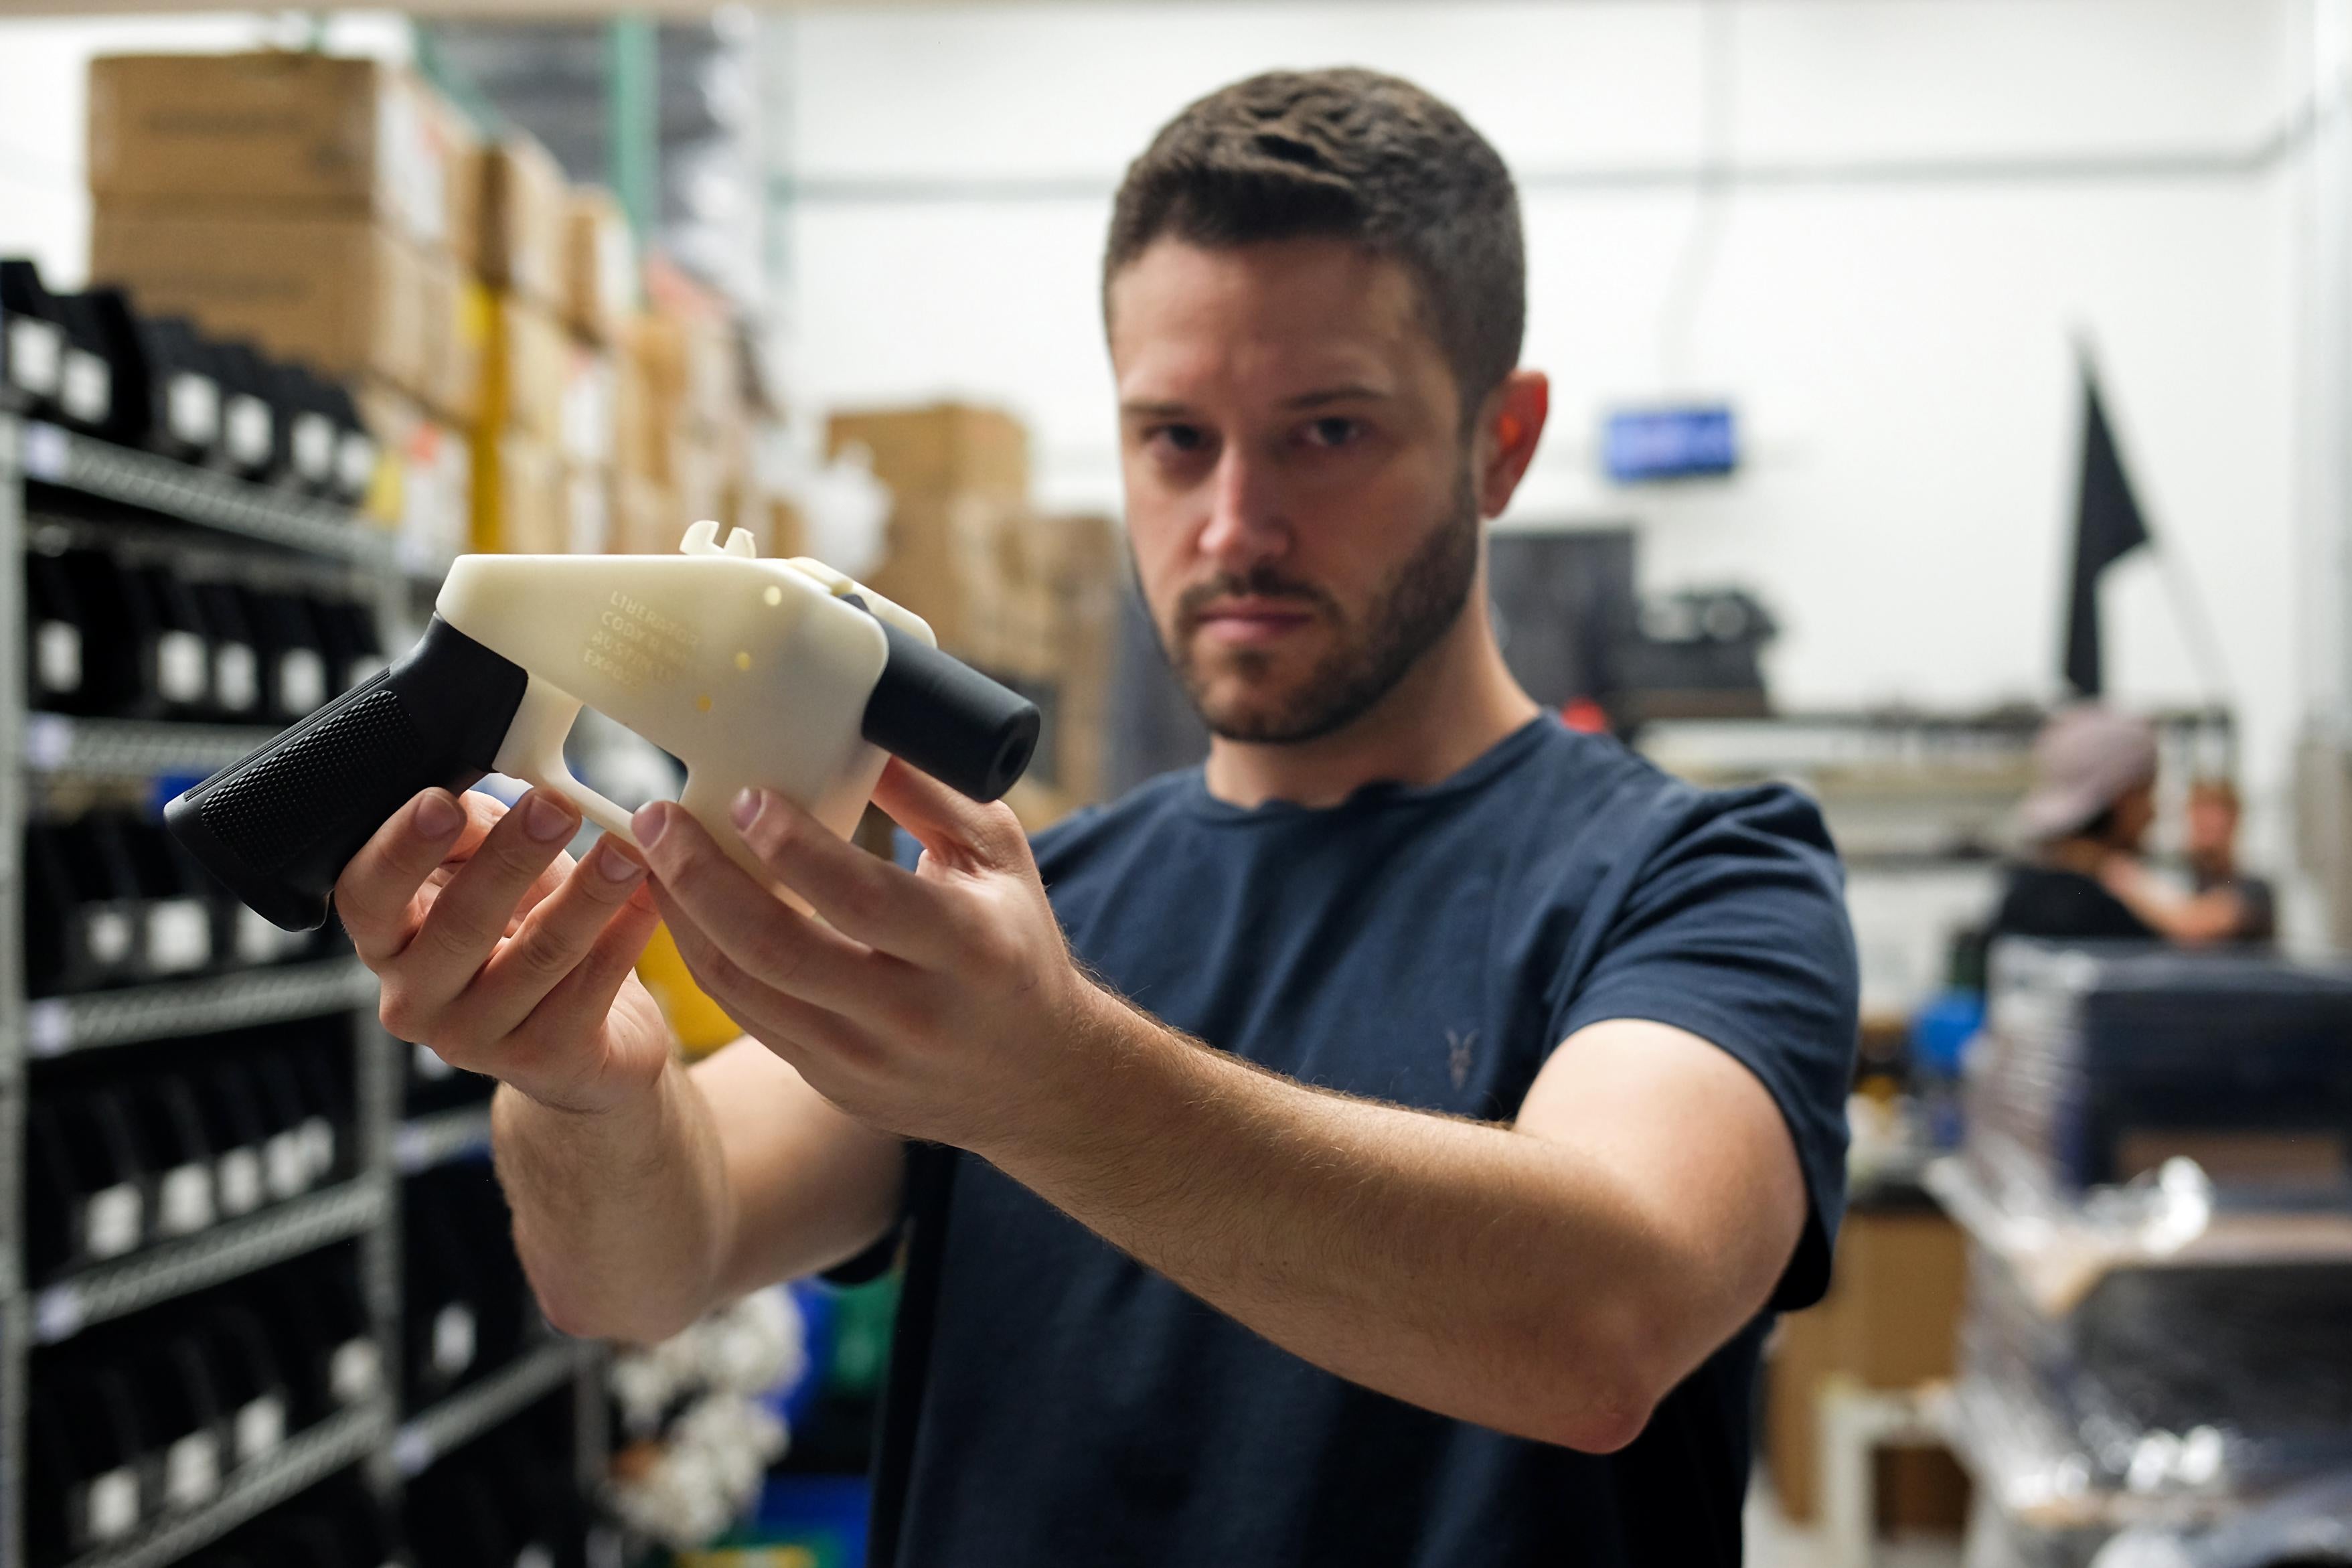 Cody Wilson, owner of Defense Distributed company, holds a 3D printed gun, called the "Liberator."